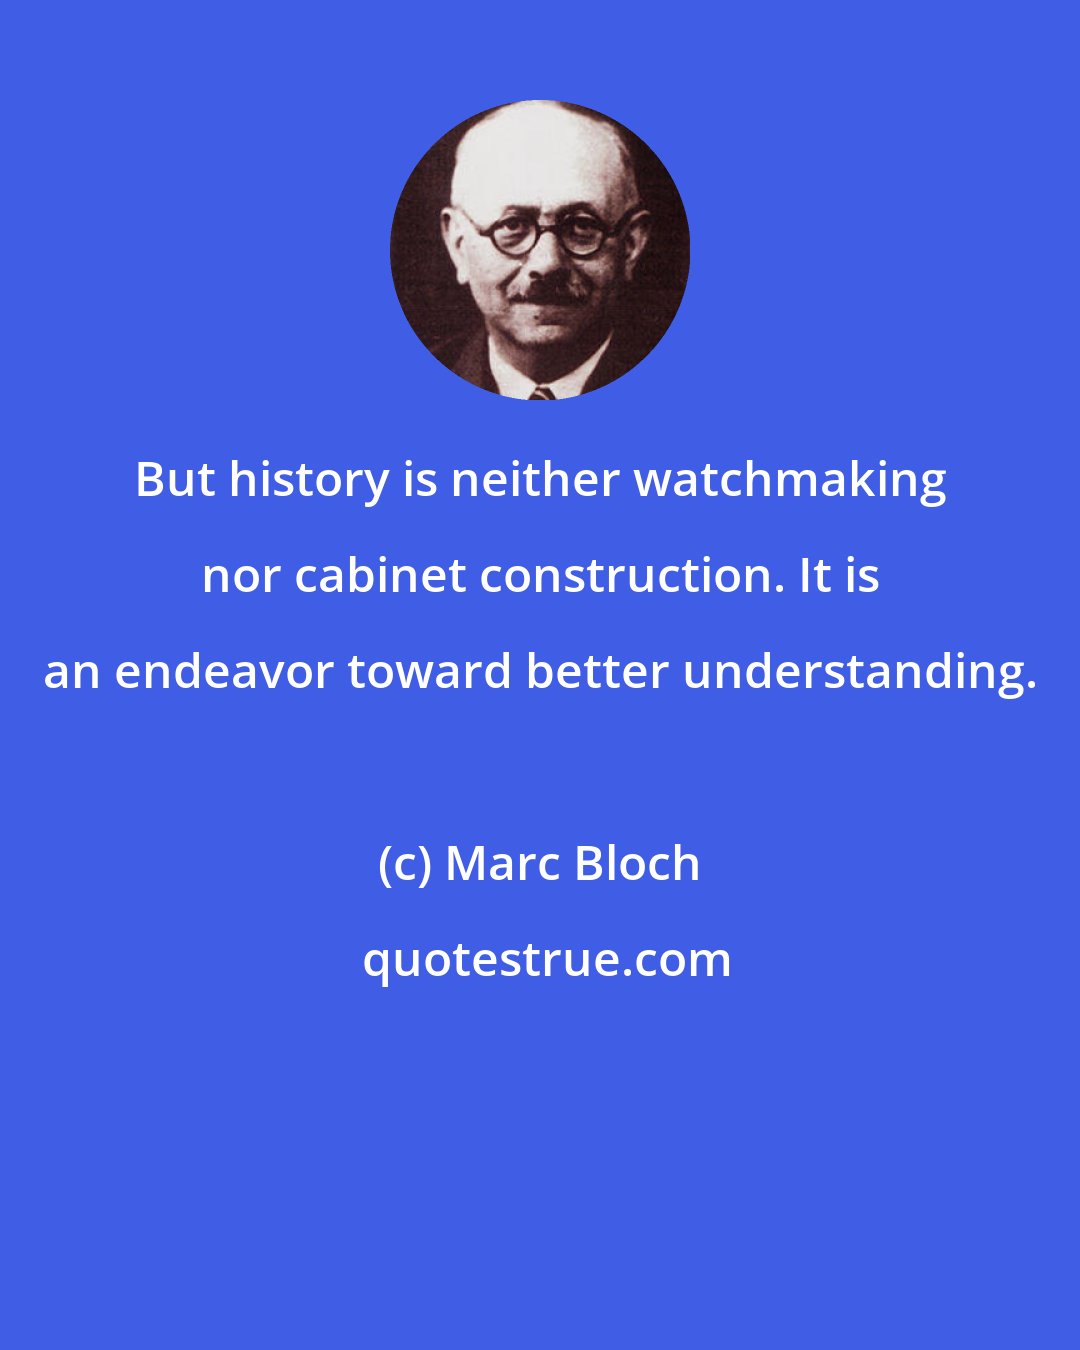 Marc Bloch: But history is neither watchmaking nor cabinet construction. It is an endeavor toward better understanding.